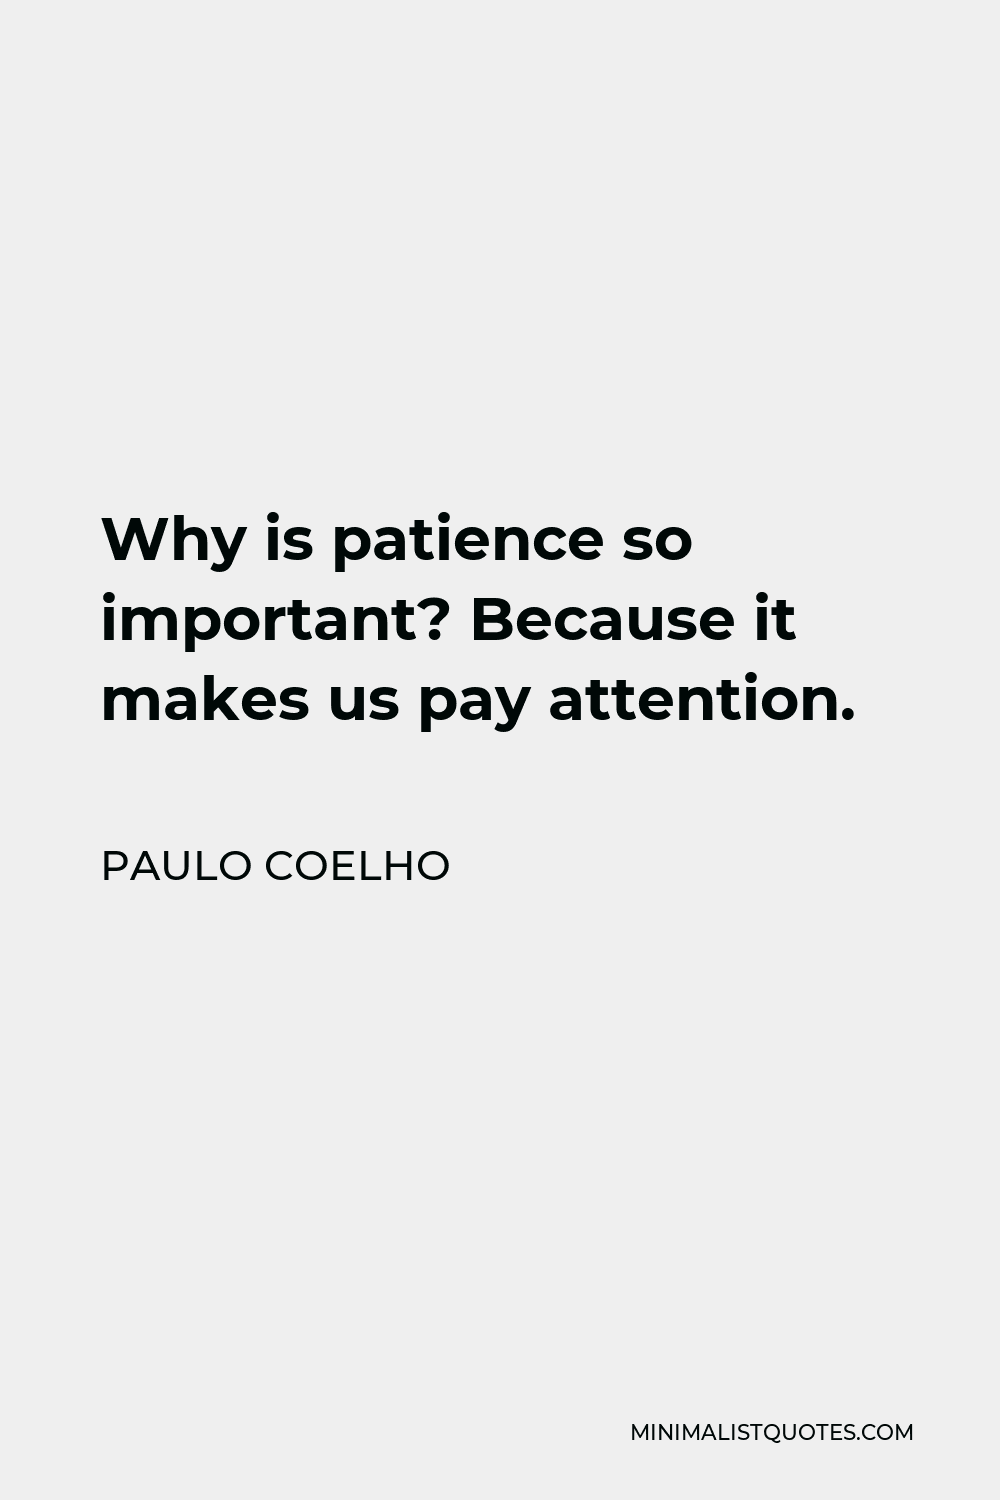 Paulo Coelho Quote - Why is patience so important? Because it makes us pay attention.